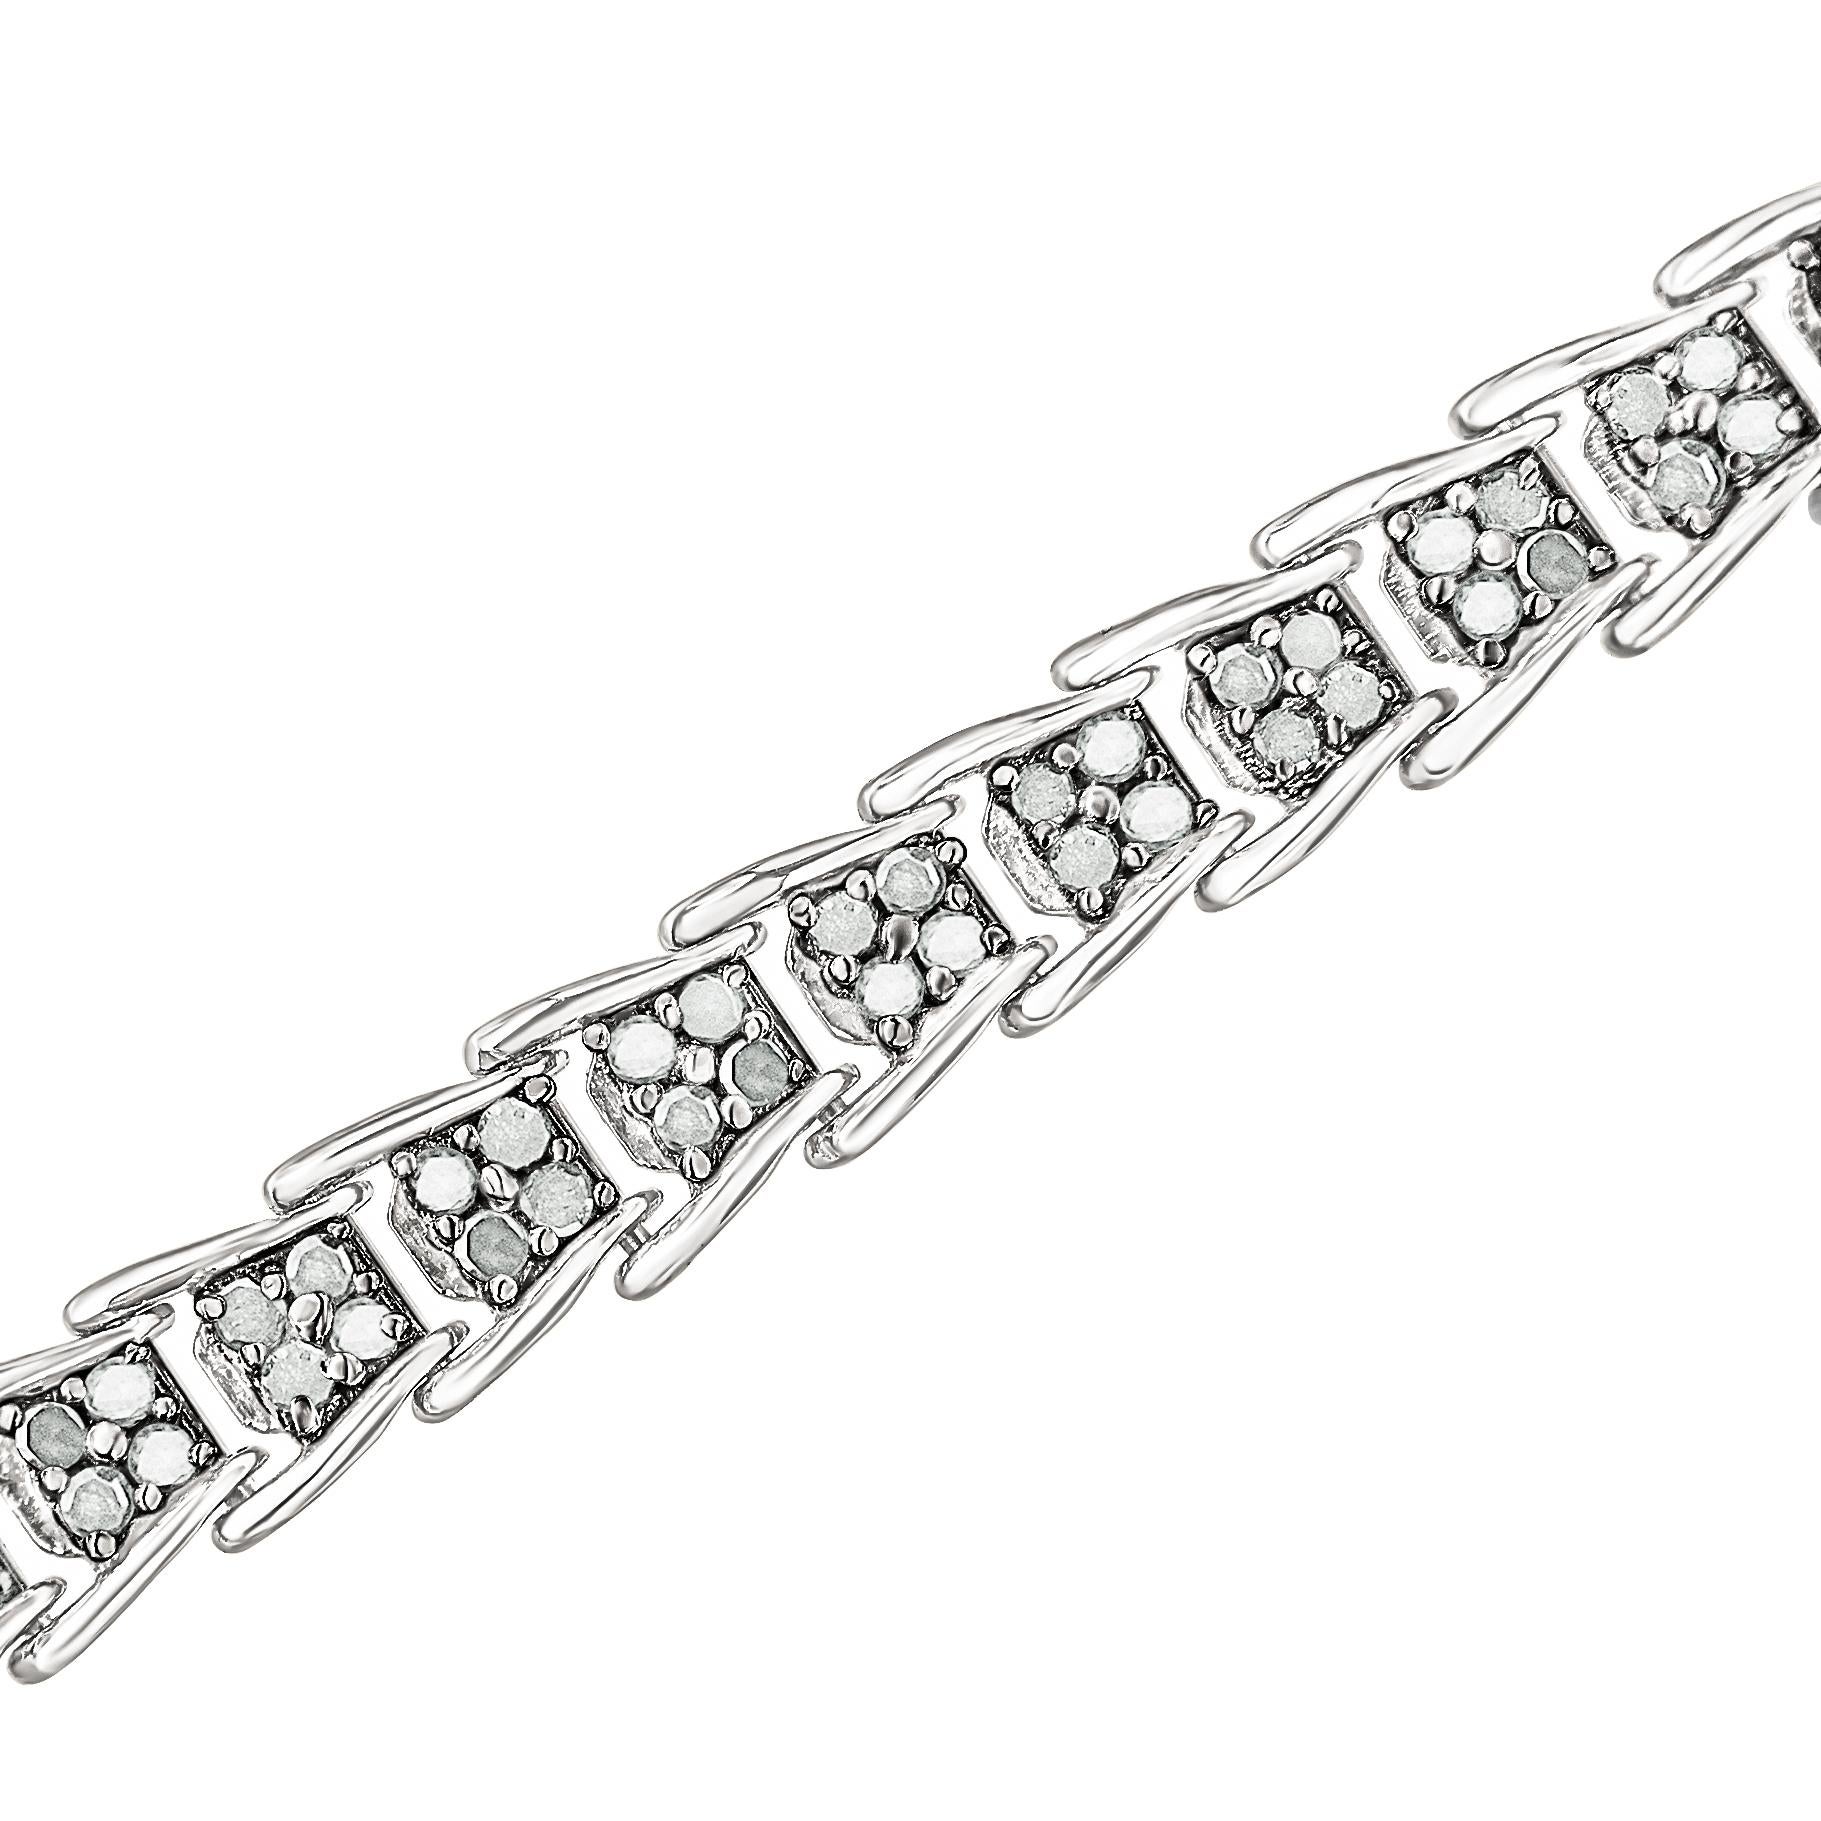 STUNNINGLY UNIQUE – What sets this sterling silver bracelet apart is the way each intricately detailed link fans out for a dramatic effect. The nested links provide a seamless look that sits elegantly against the wrist. Each diamond is set in a